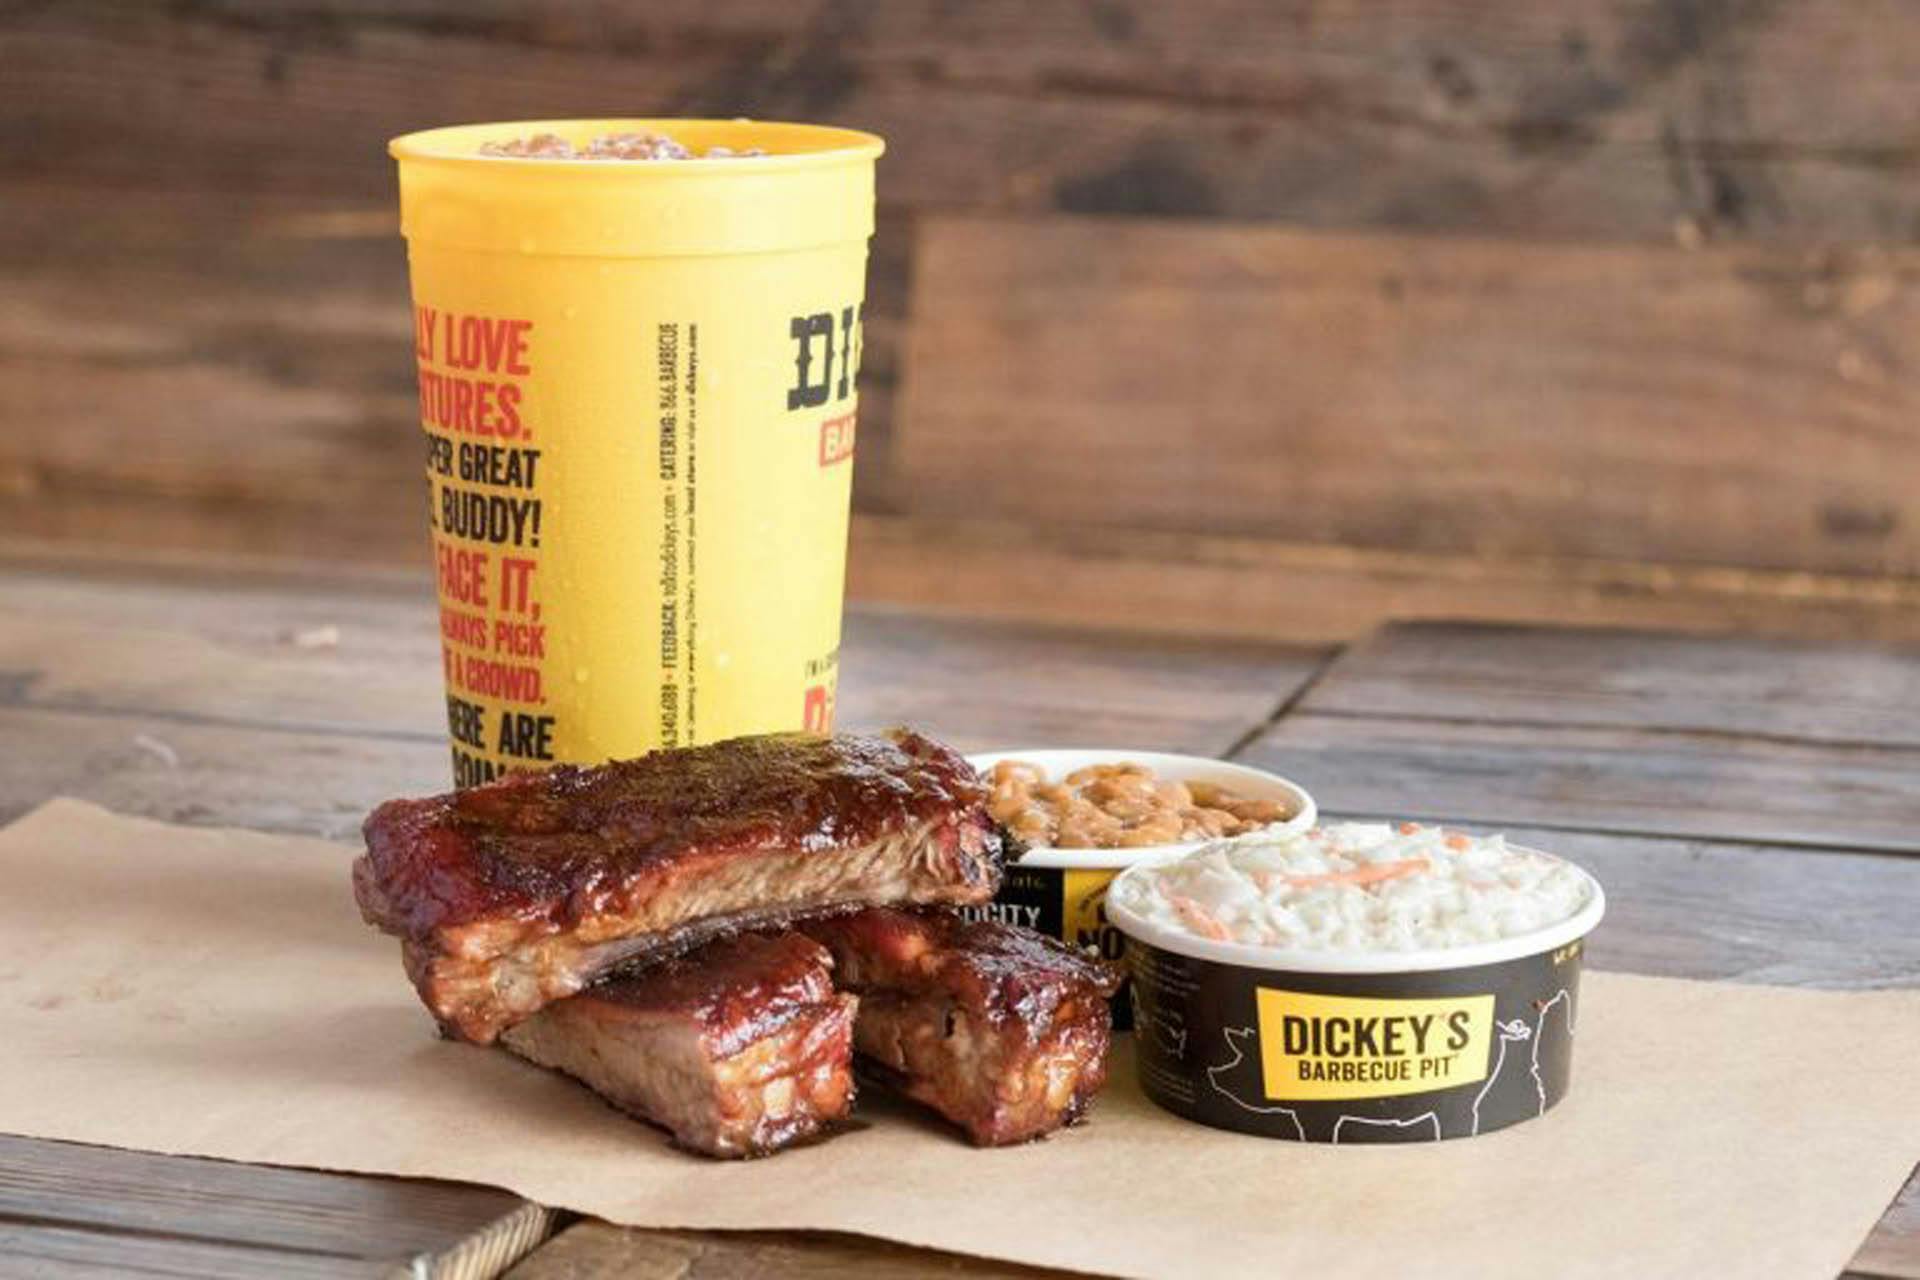 Local Entrepreneur Brings Dickey’s Texas-style Barbecue to Gallup 